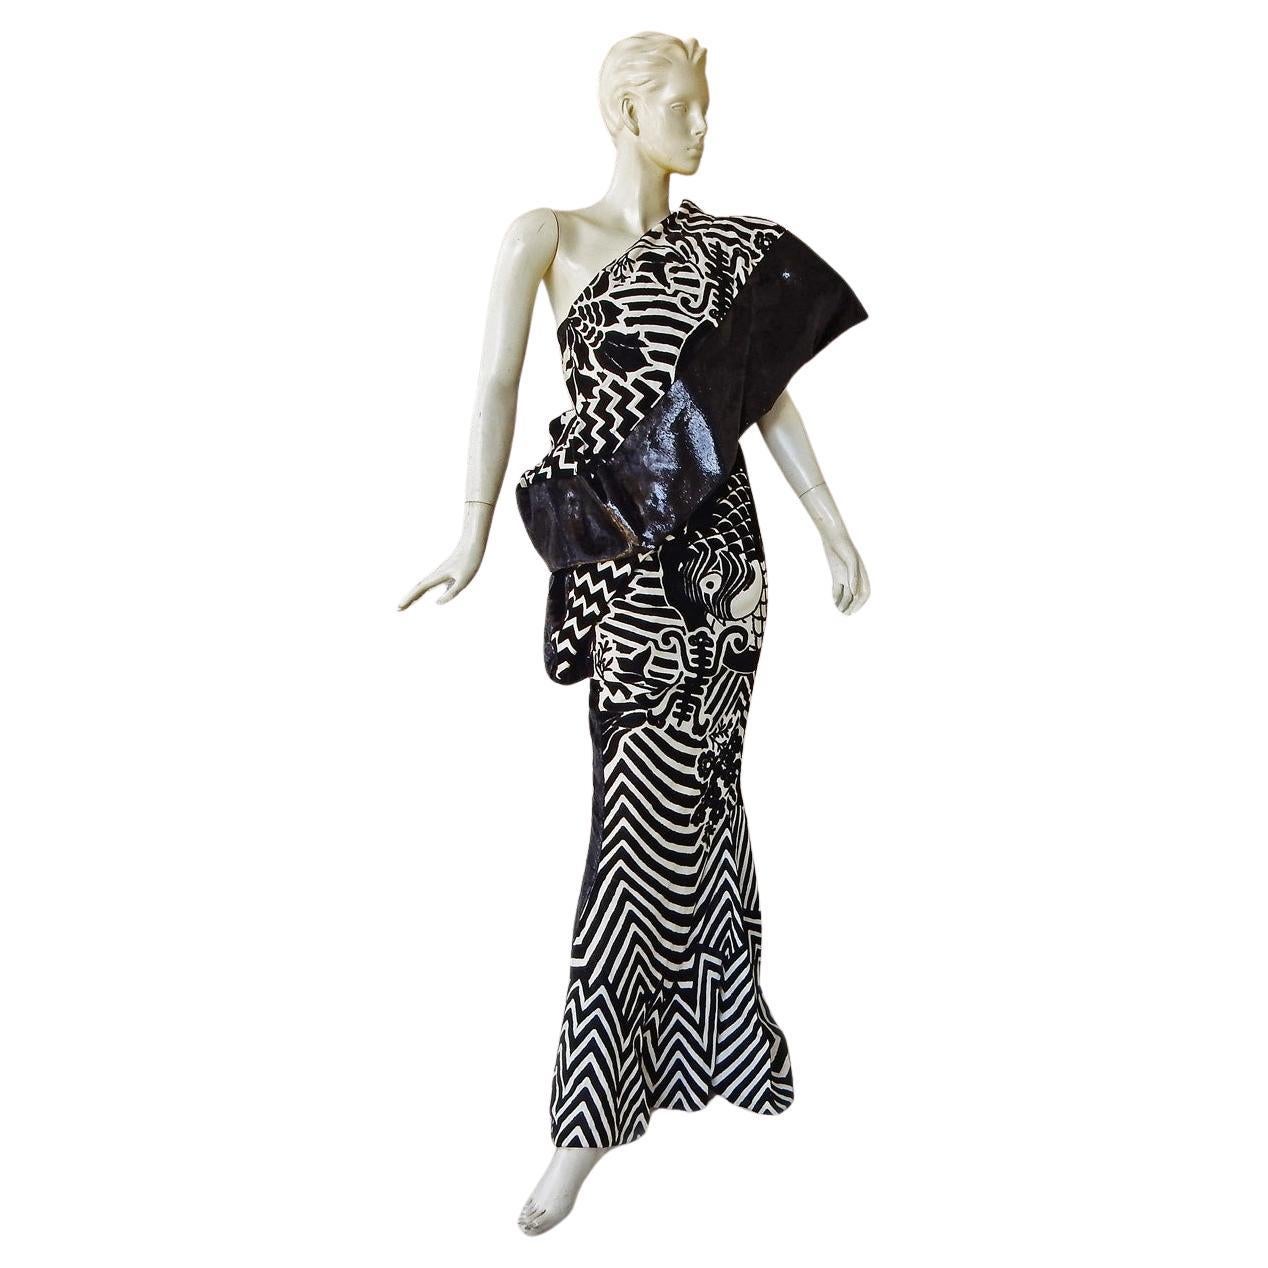 Dior by John Galliano Asian Kabuki "Elvira" Runway Gown Collectors, Museums For Sale